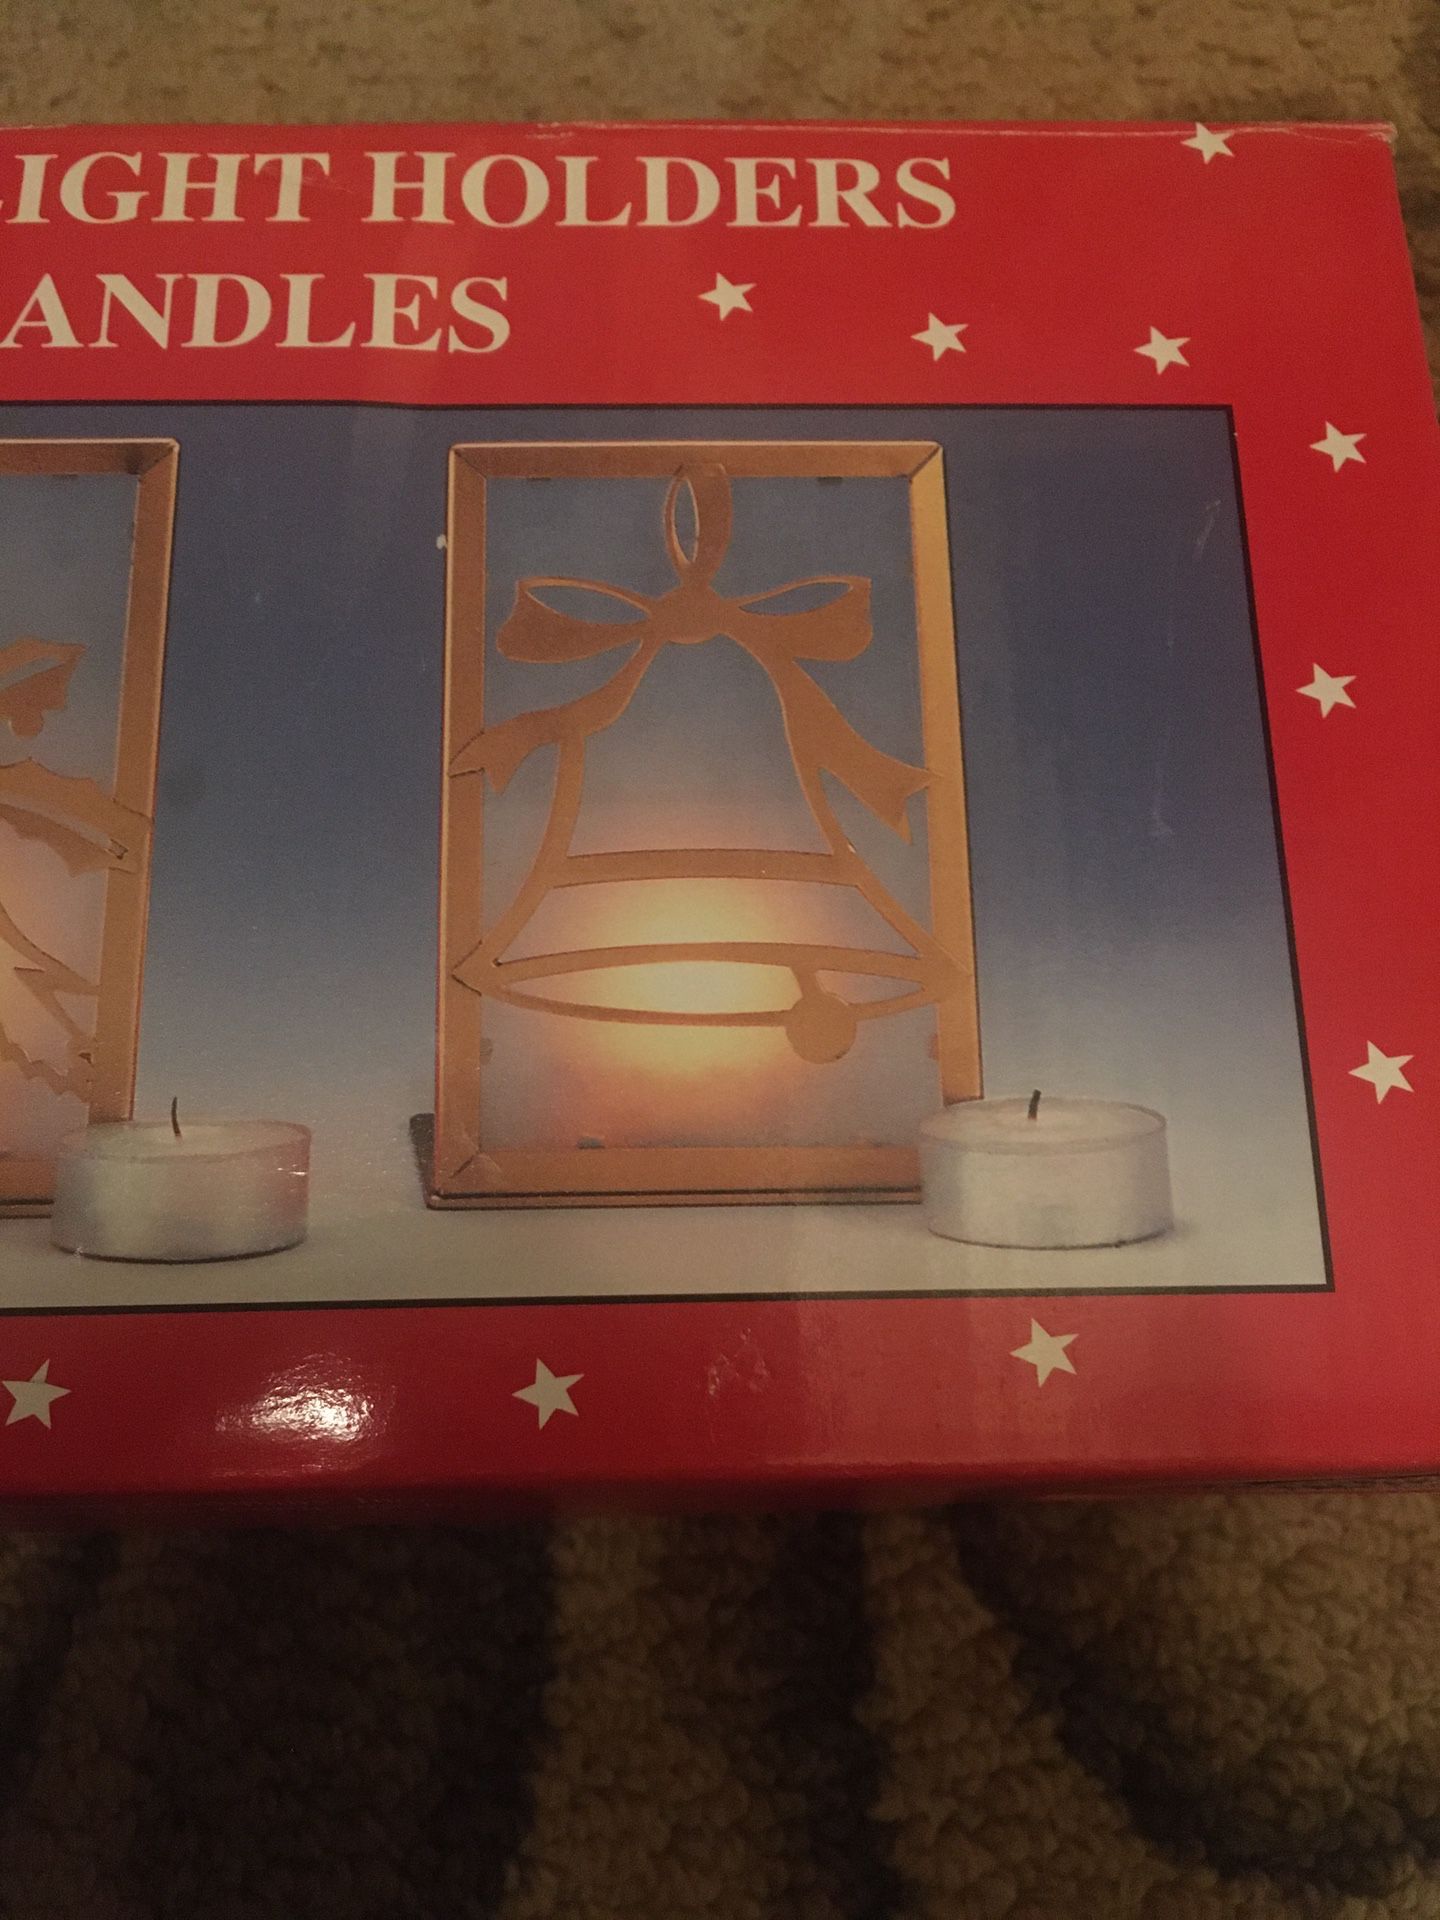 Set Of 3 Tea Light Holders With Candles Tree Bird Bell